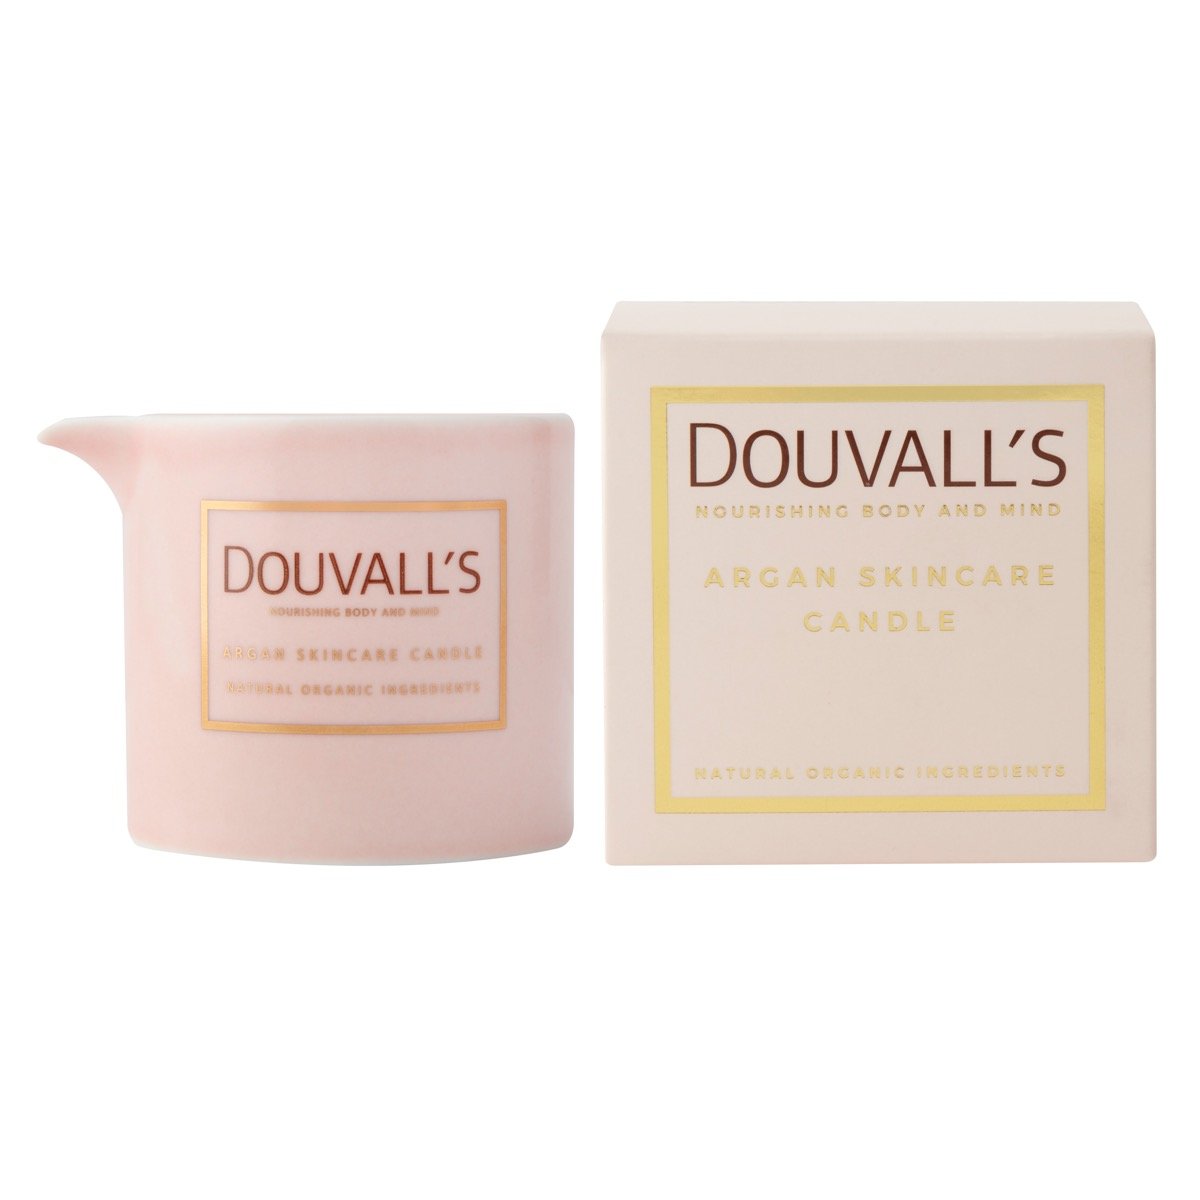 douvalls_candle_f_1_1.jpg